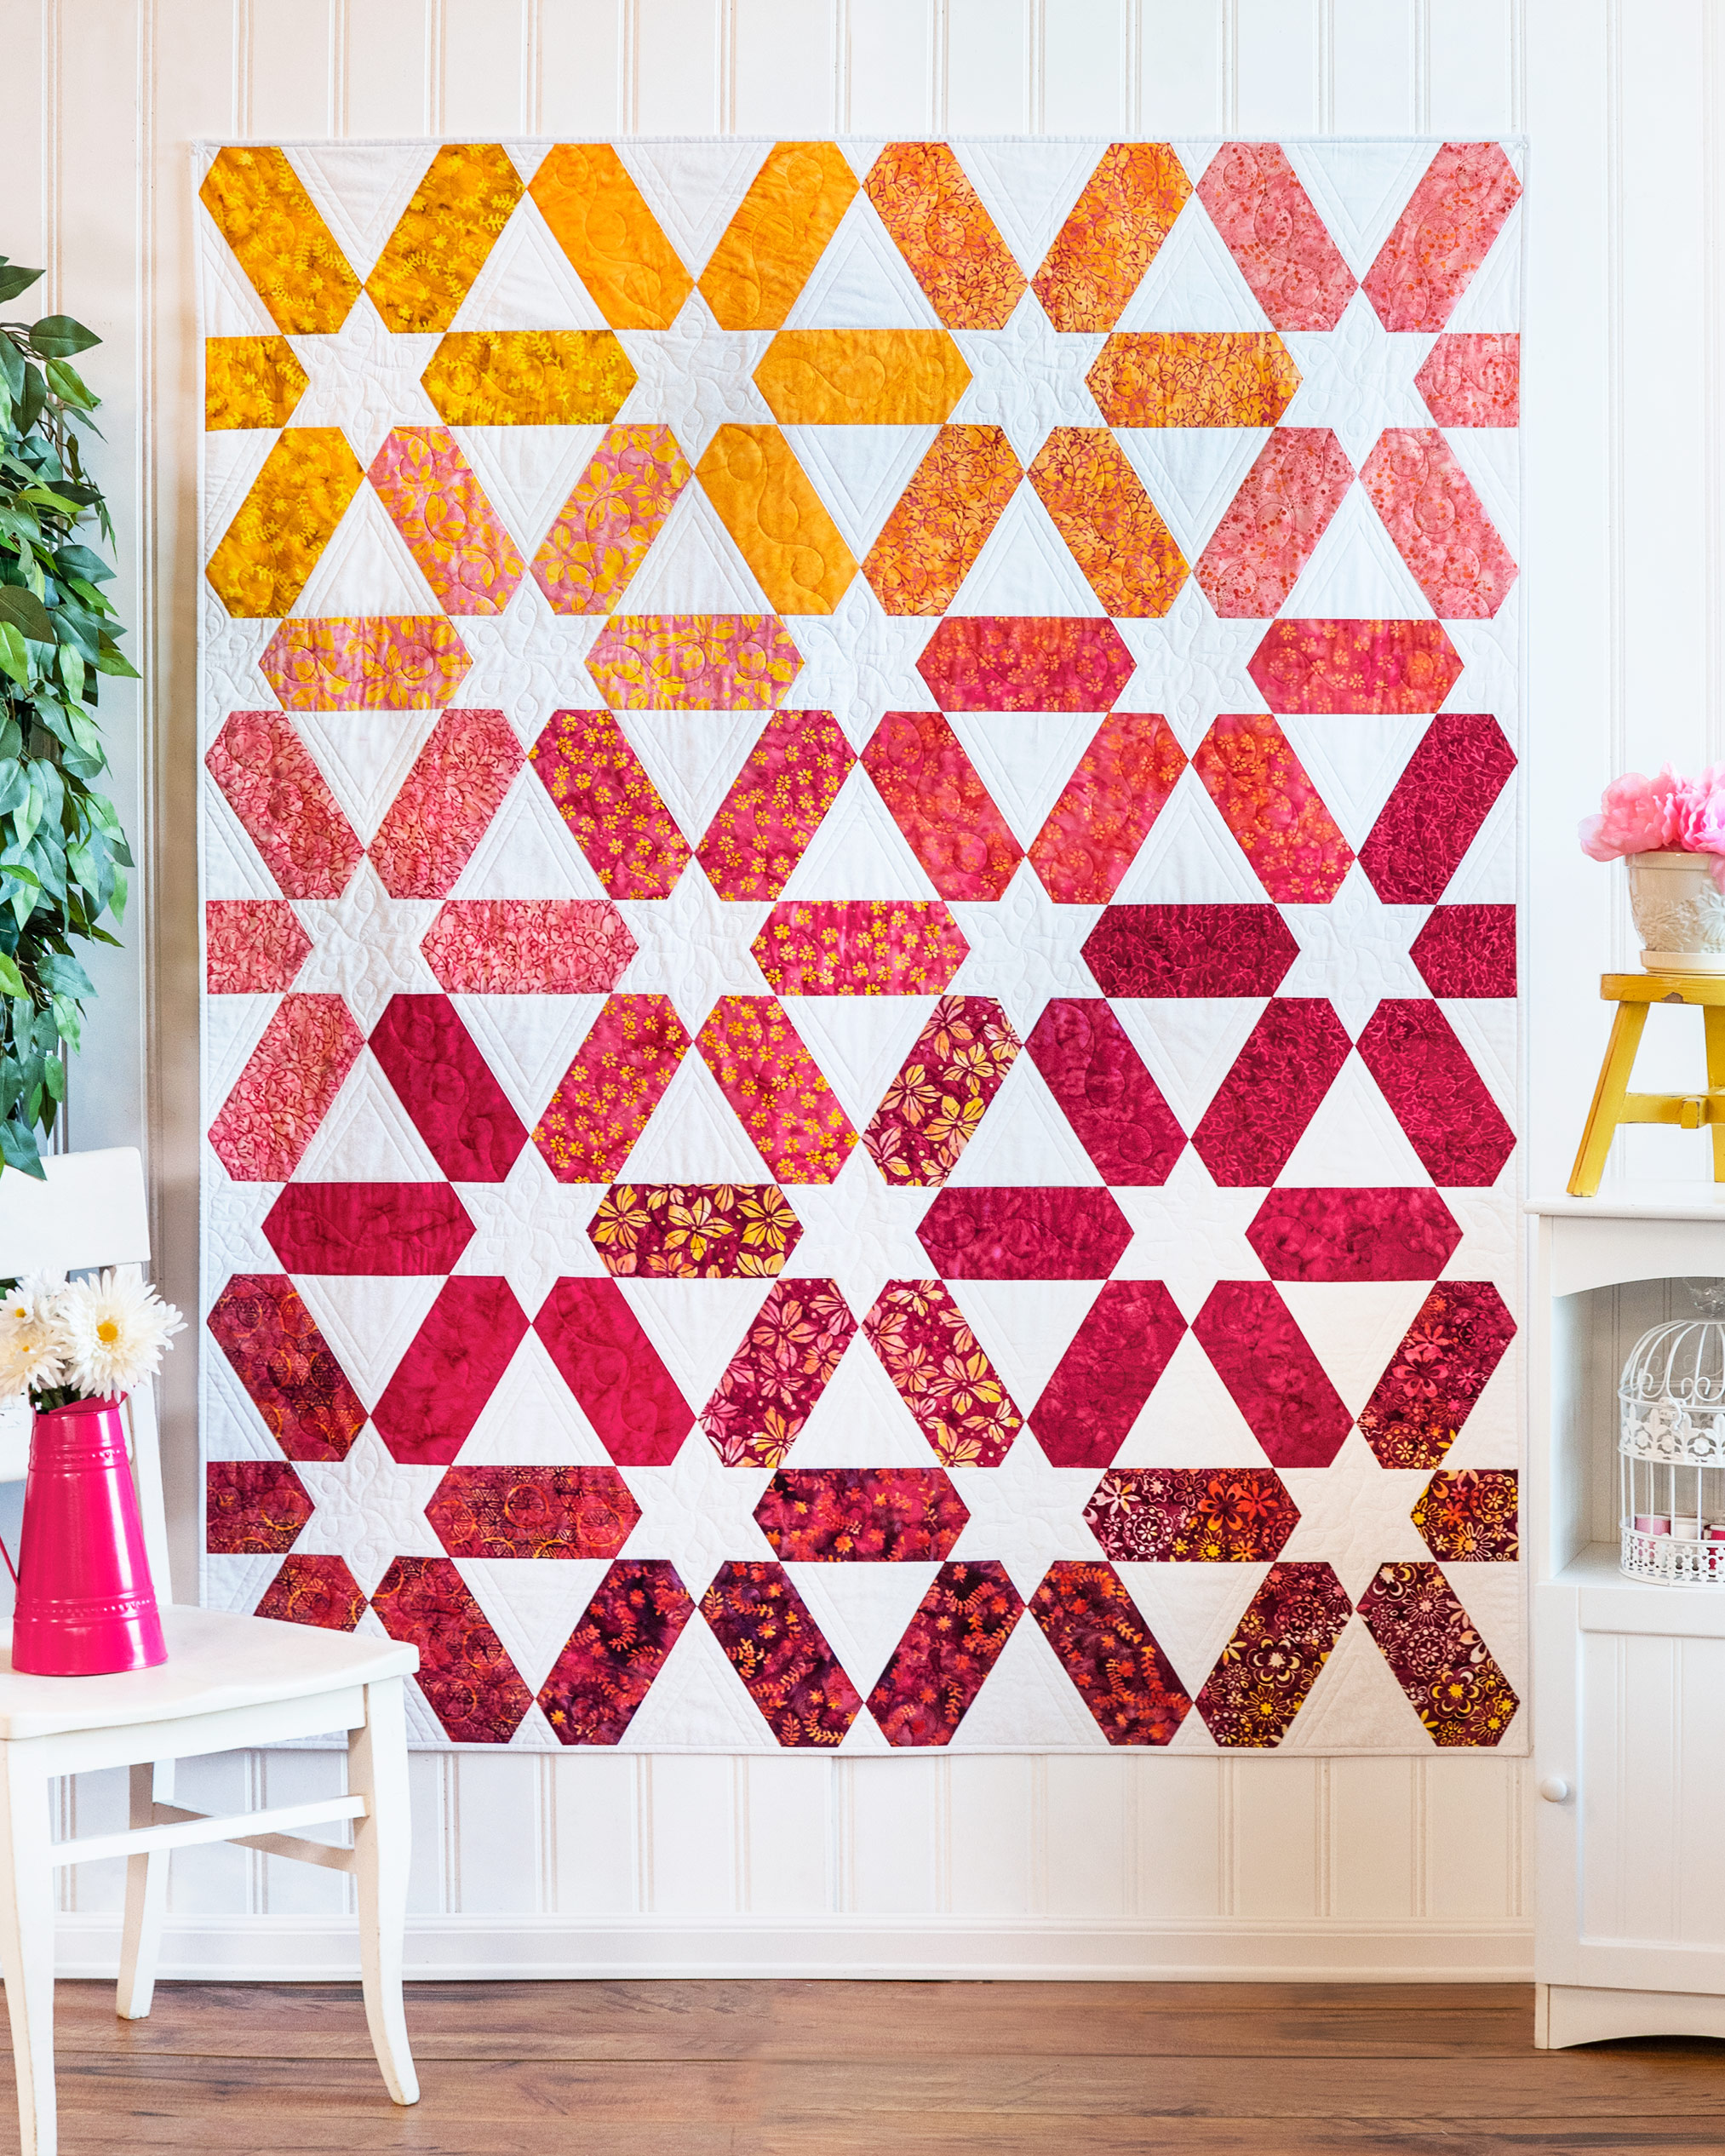 How to Use the 60º Diamond Ruler to Make a Bespoke Stars Quilt Block